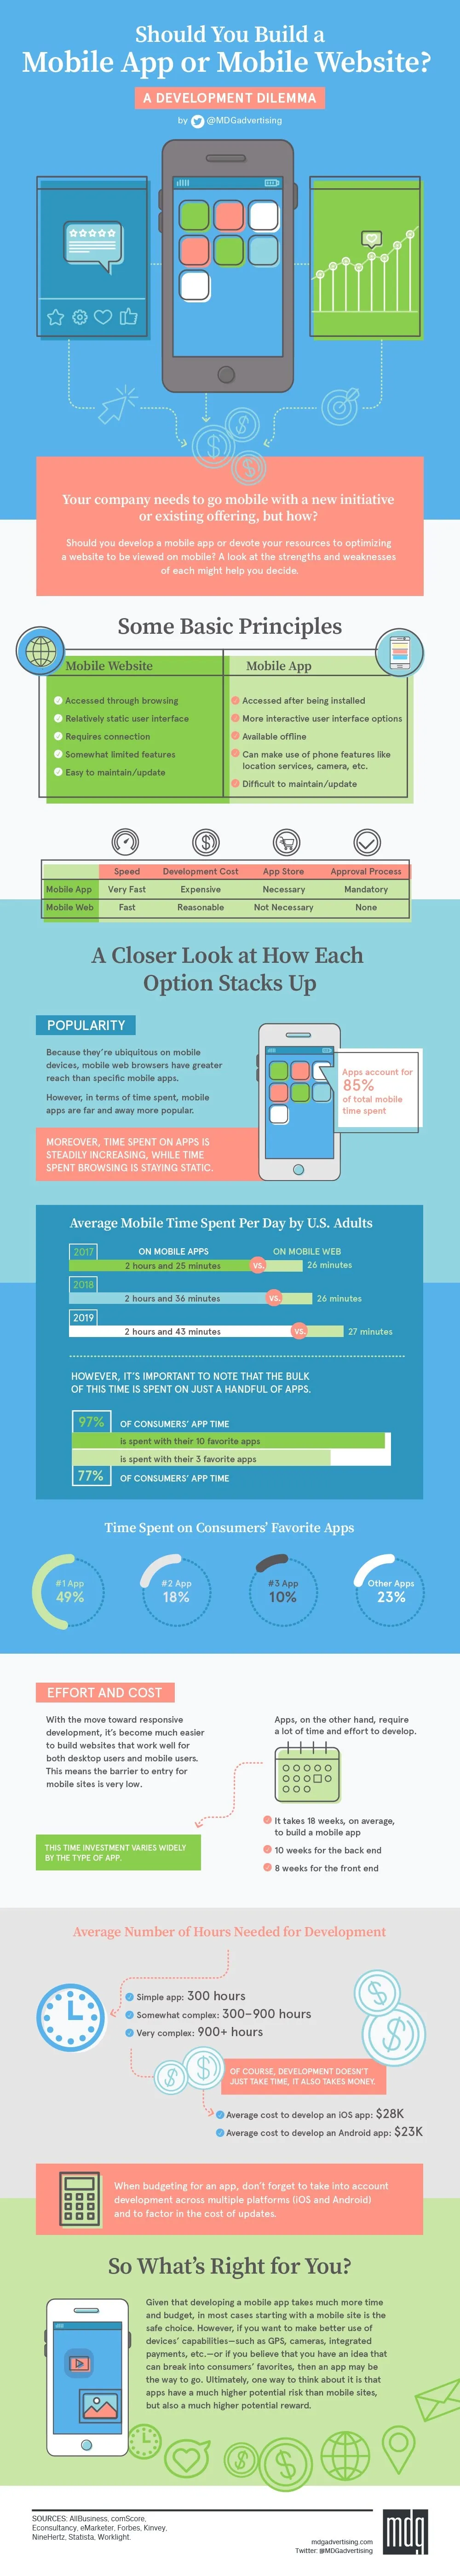 Should You Build a Mobile App or Mobile Website? [Infographic]